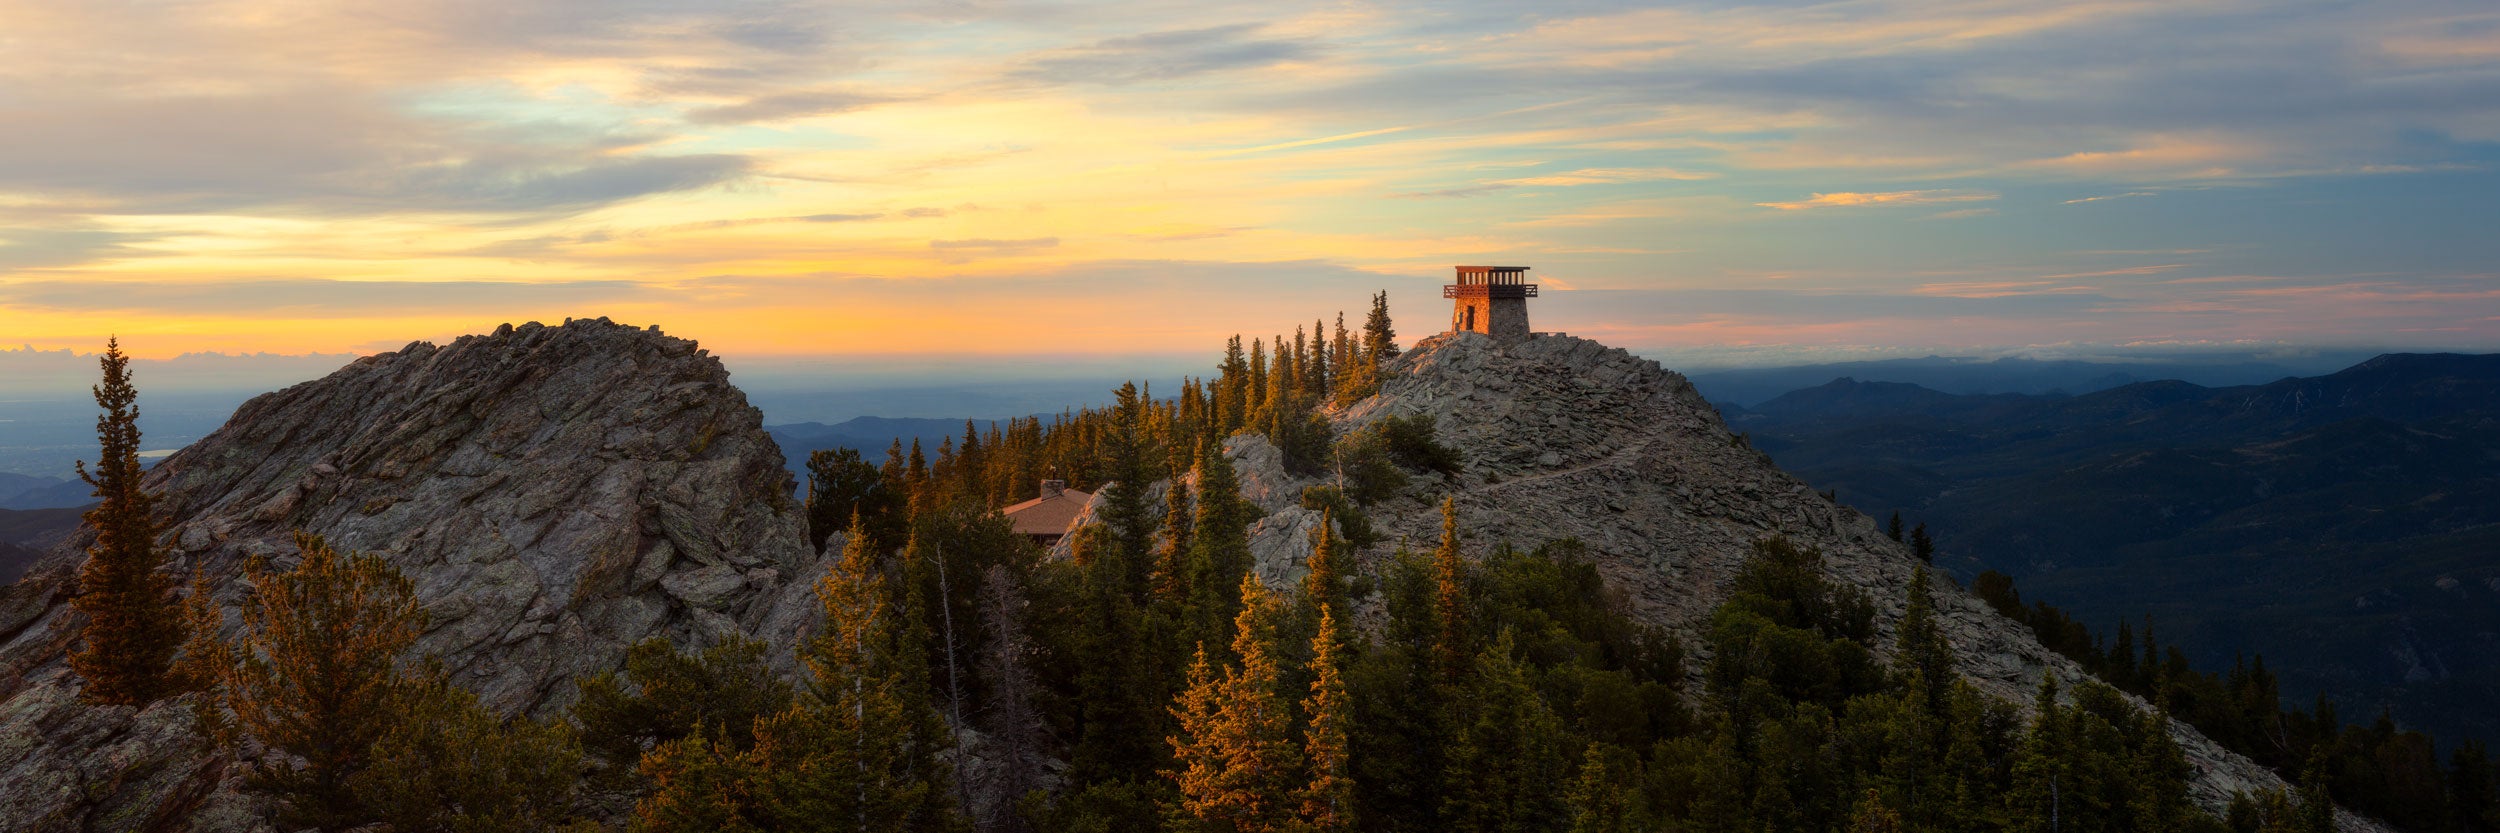 A fine art nature photograph of a fire tower lookout near Evergreen and Denver, Colorado at sunrise.